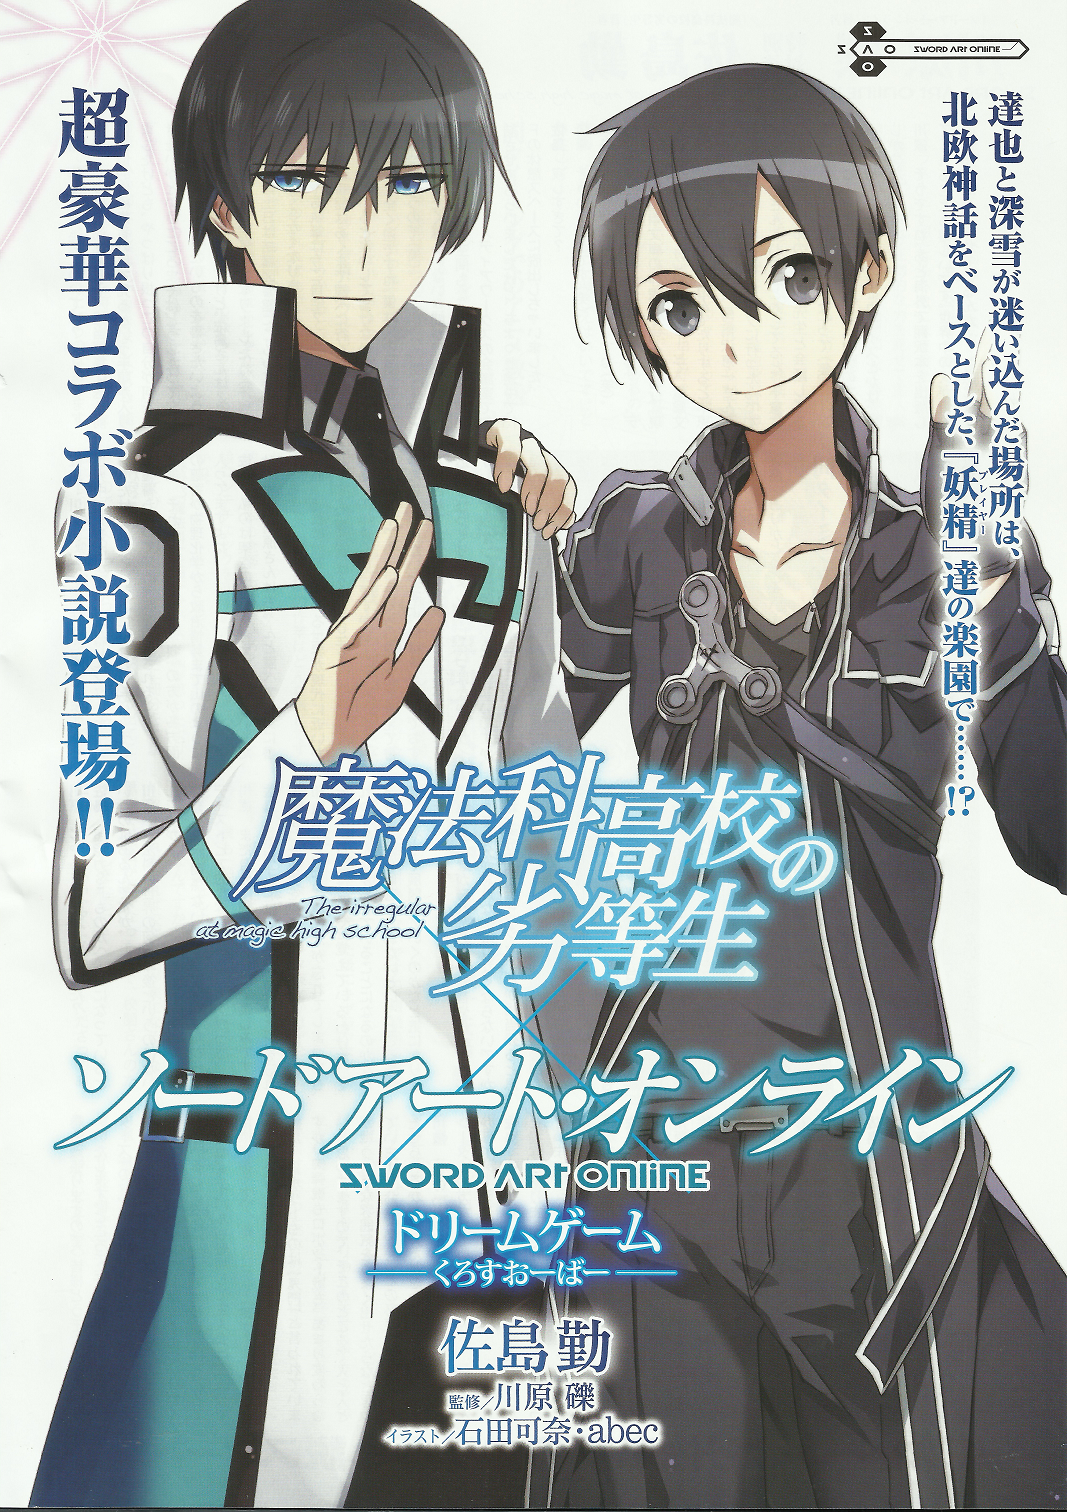 Sword Art Online Progressive: Aria of a Starless Night - Anime Baths Wiki,  the database for bathing scenes in anime, manga & other related media